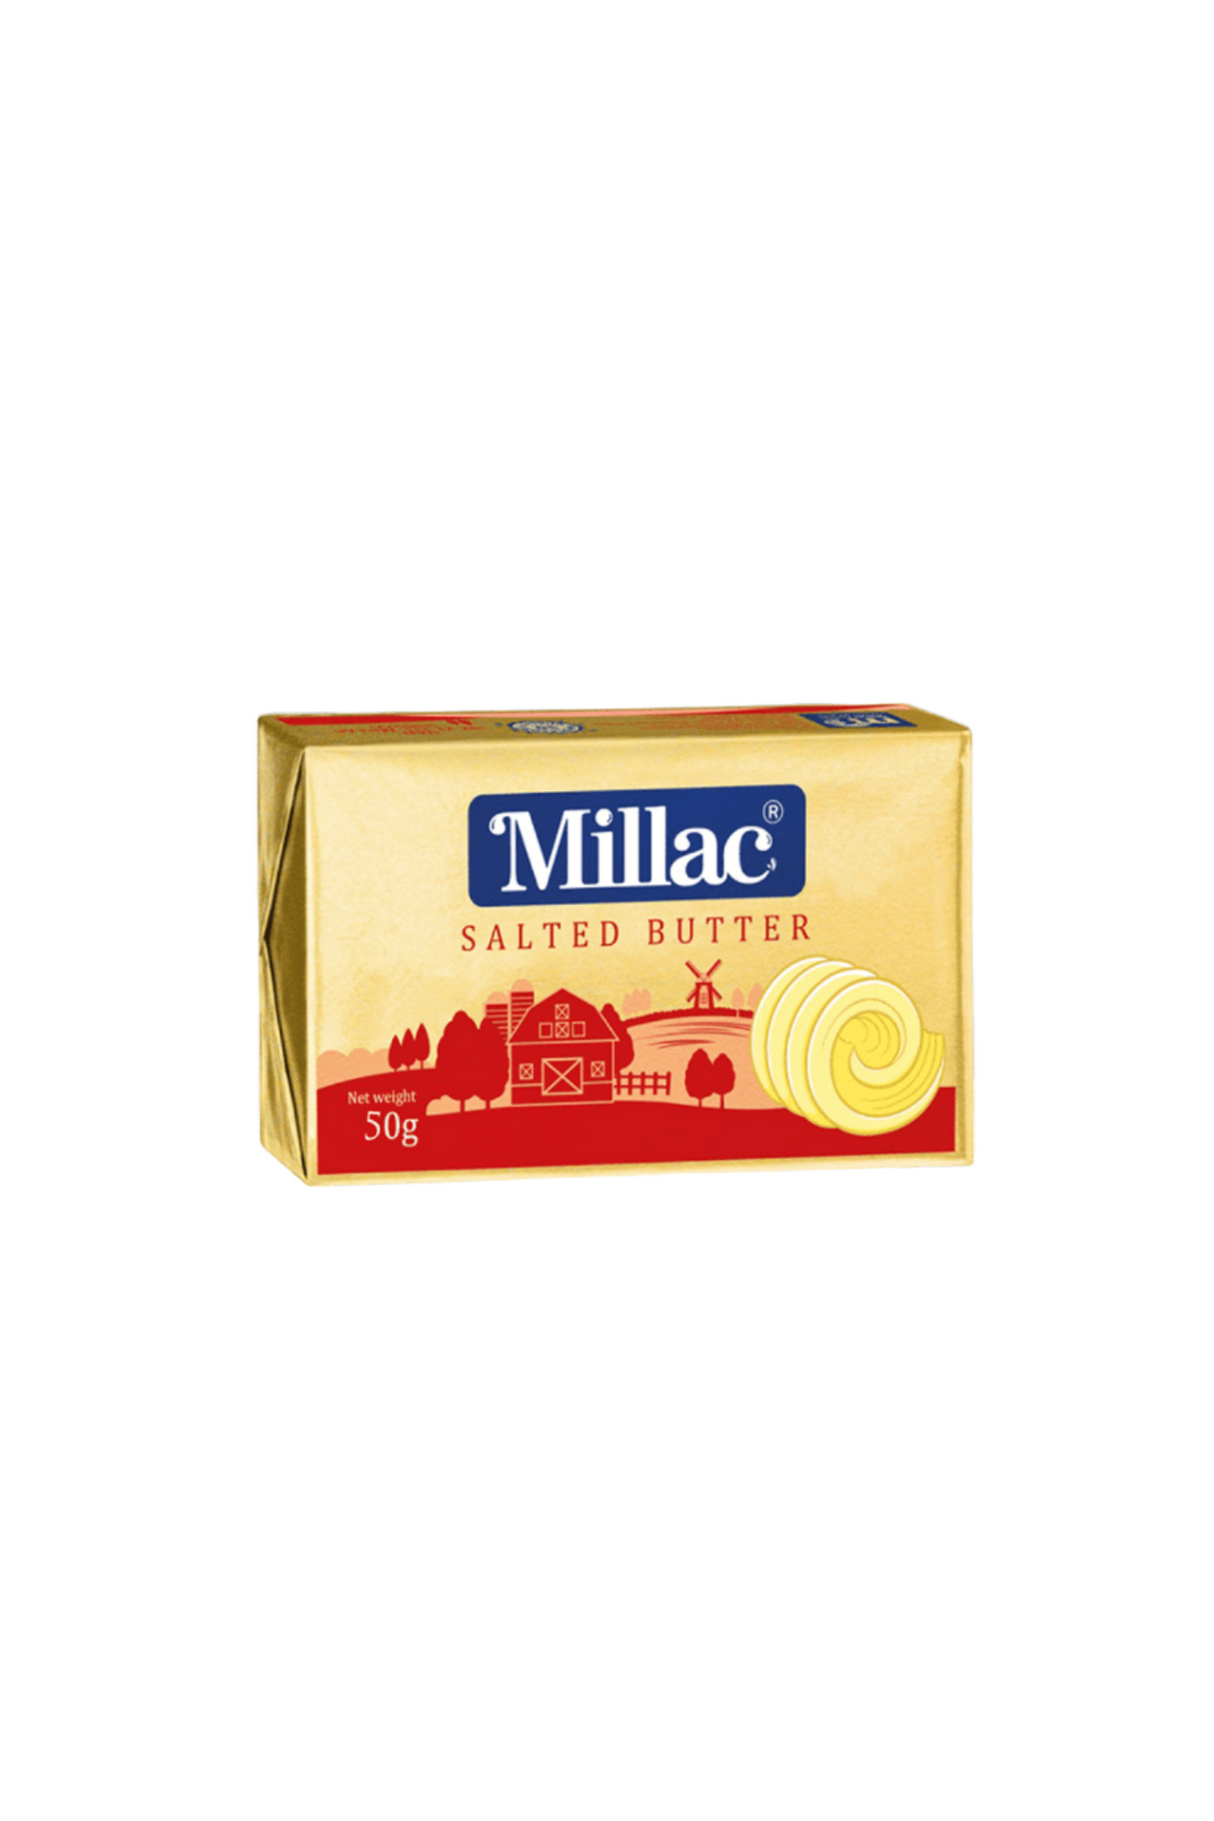 millac butter salted 50g